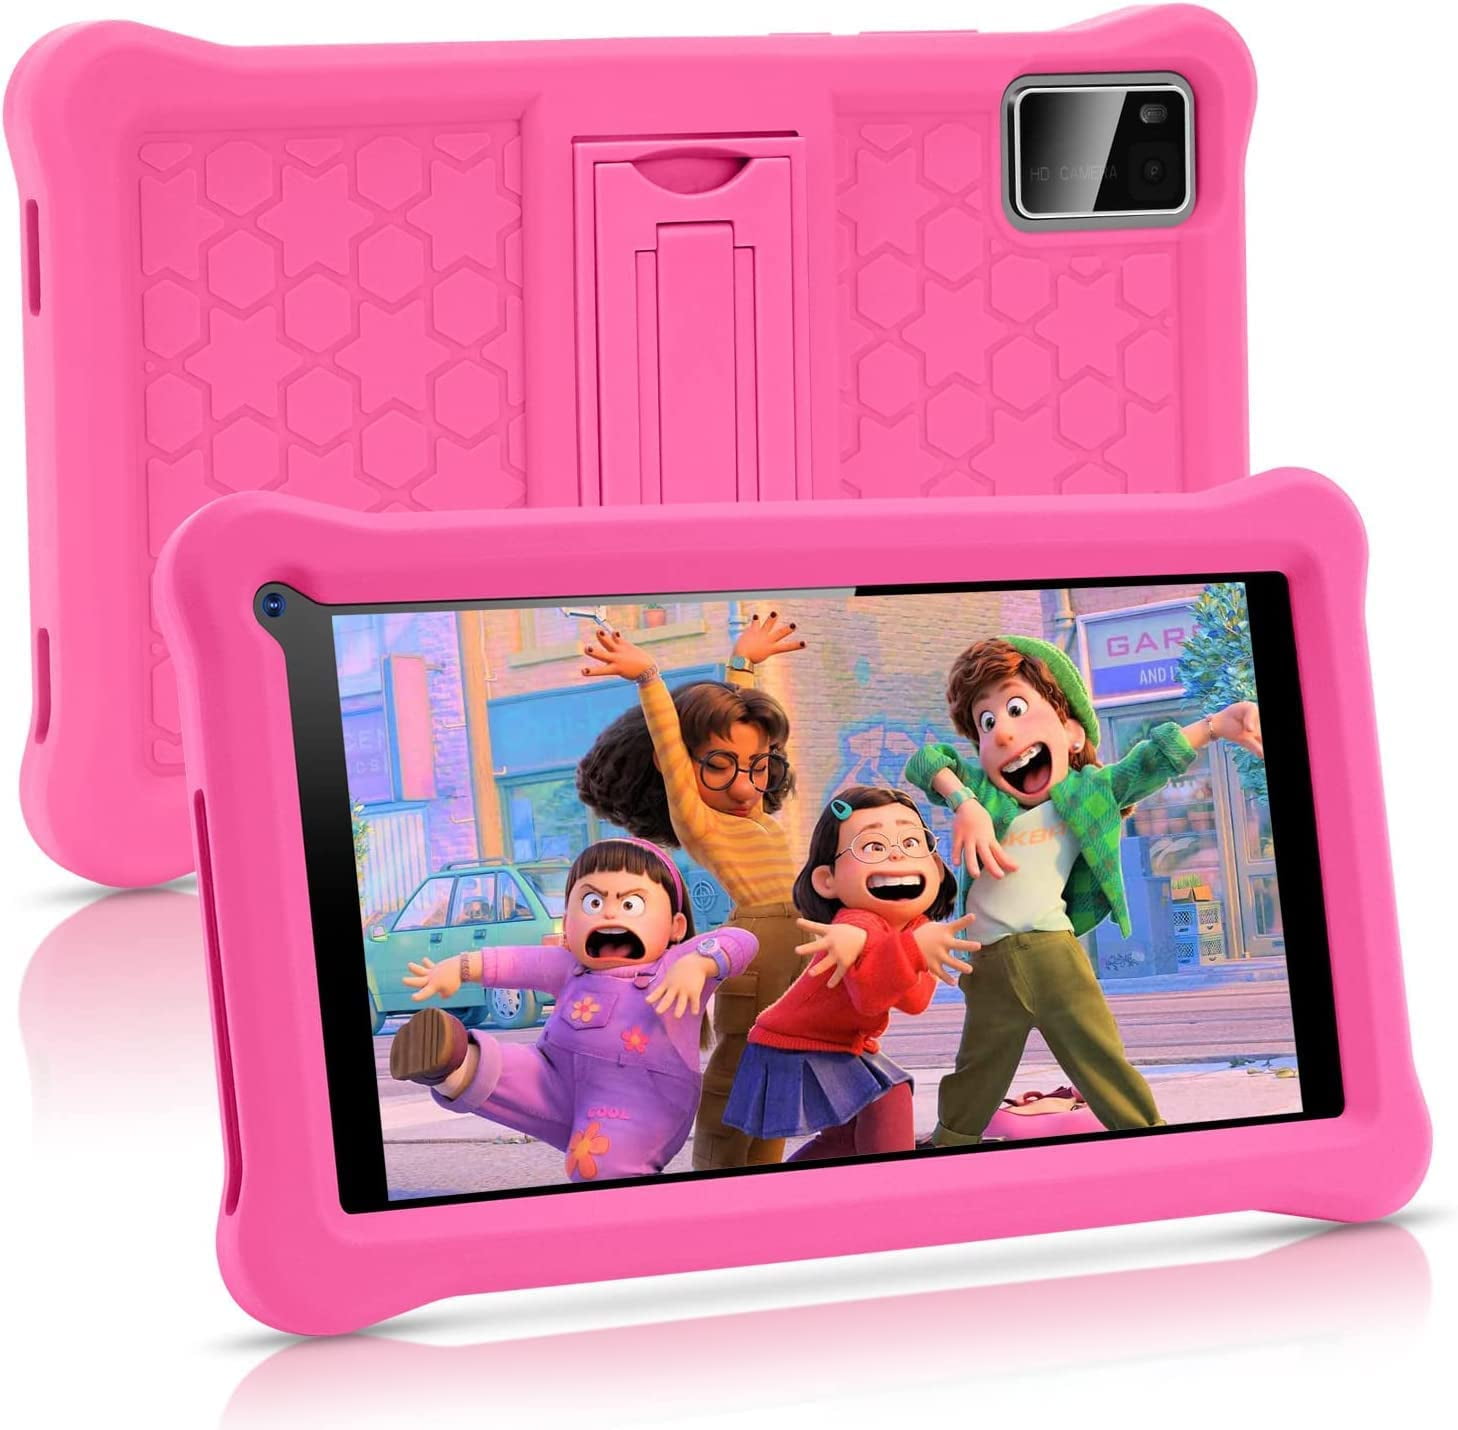 Contixo 7” V8-2 32GB Kids Tablet Featuring 50 Disney eBooks Ages 3-10